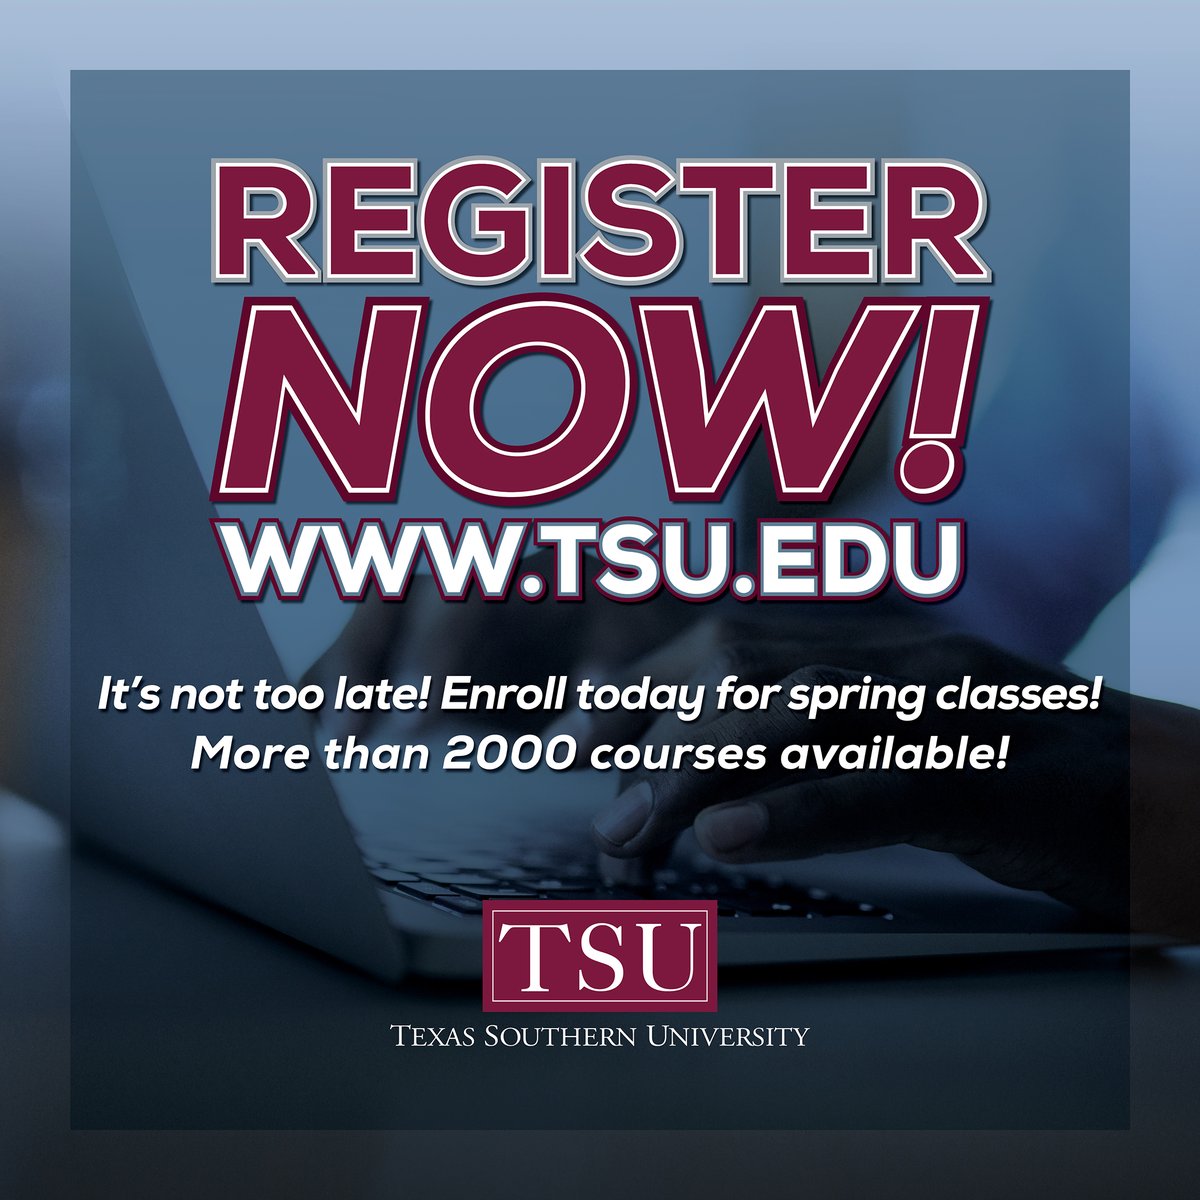 Tigers, you still have time to register for spring classes! It's not too late! Remember 15x8=Graduate. Make sure you're enrolled in at least 15 credit hours. Make a plan NOW to graduate in 4 years. #TSUProud #TSU #TexasSouthern